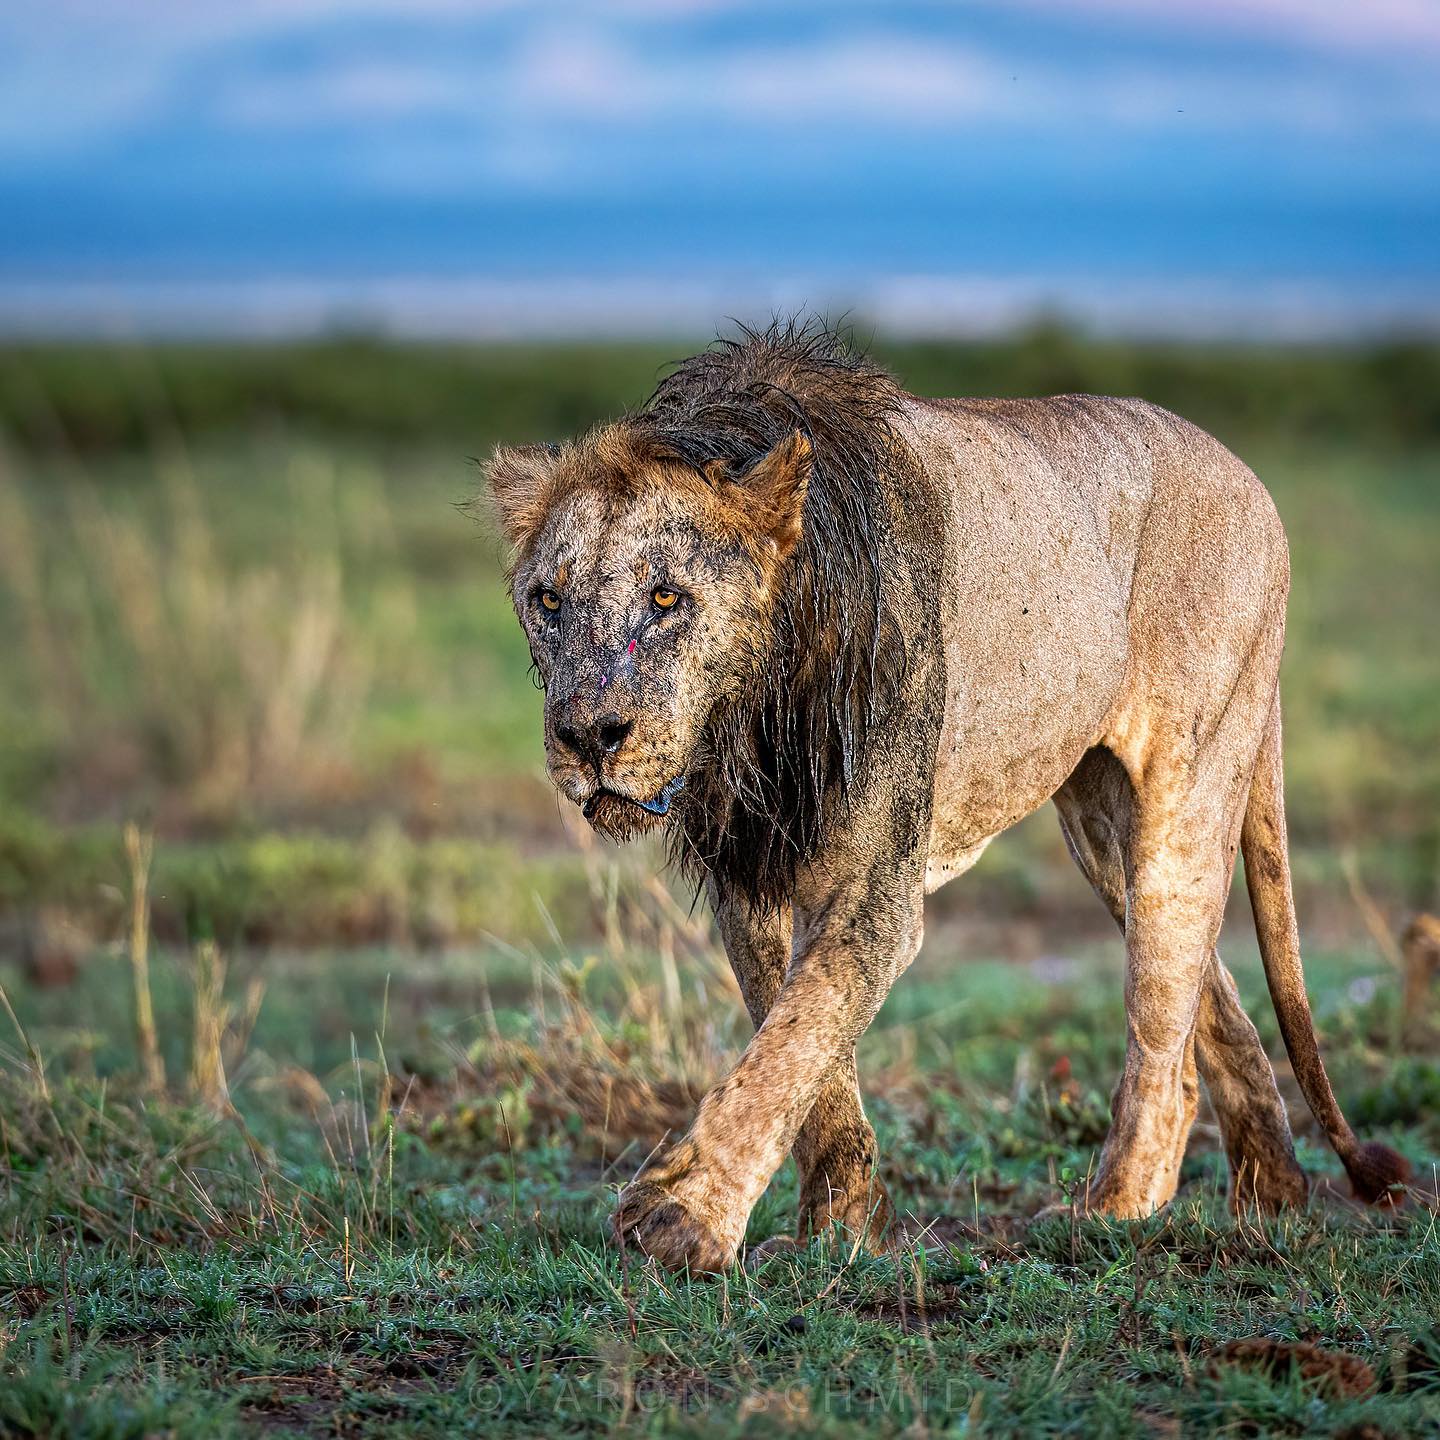 Farewell to Loonkito: Kenya Mourns the Loss of its Oldest Lion